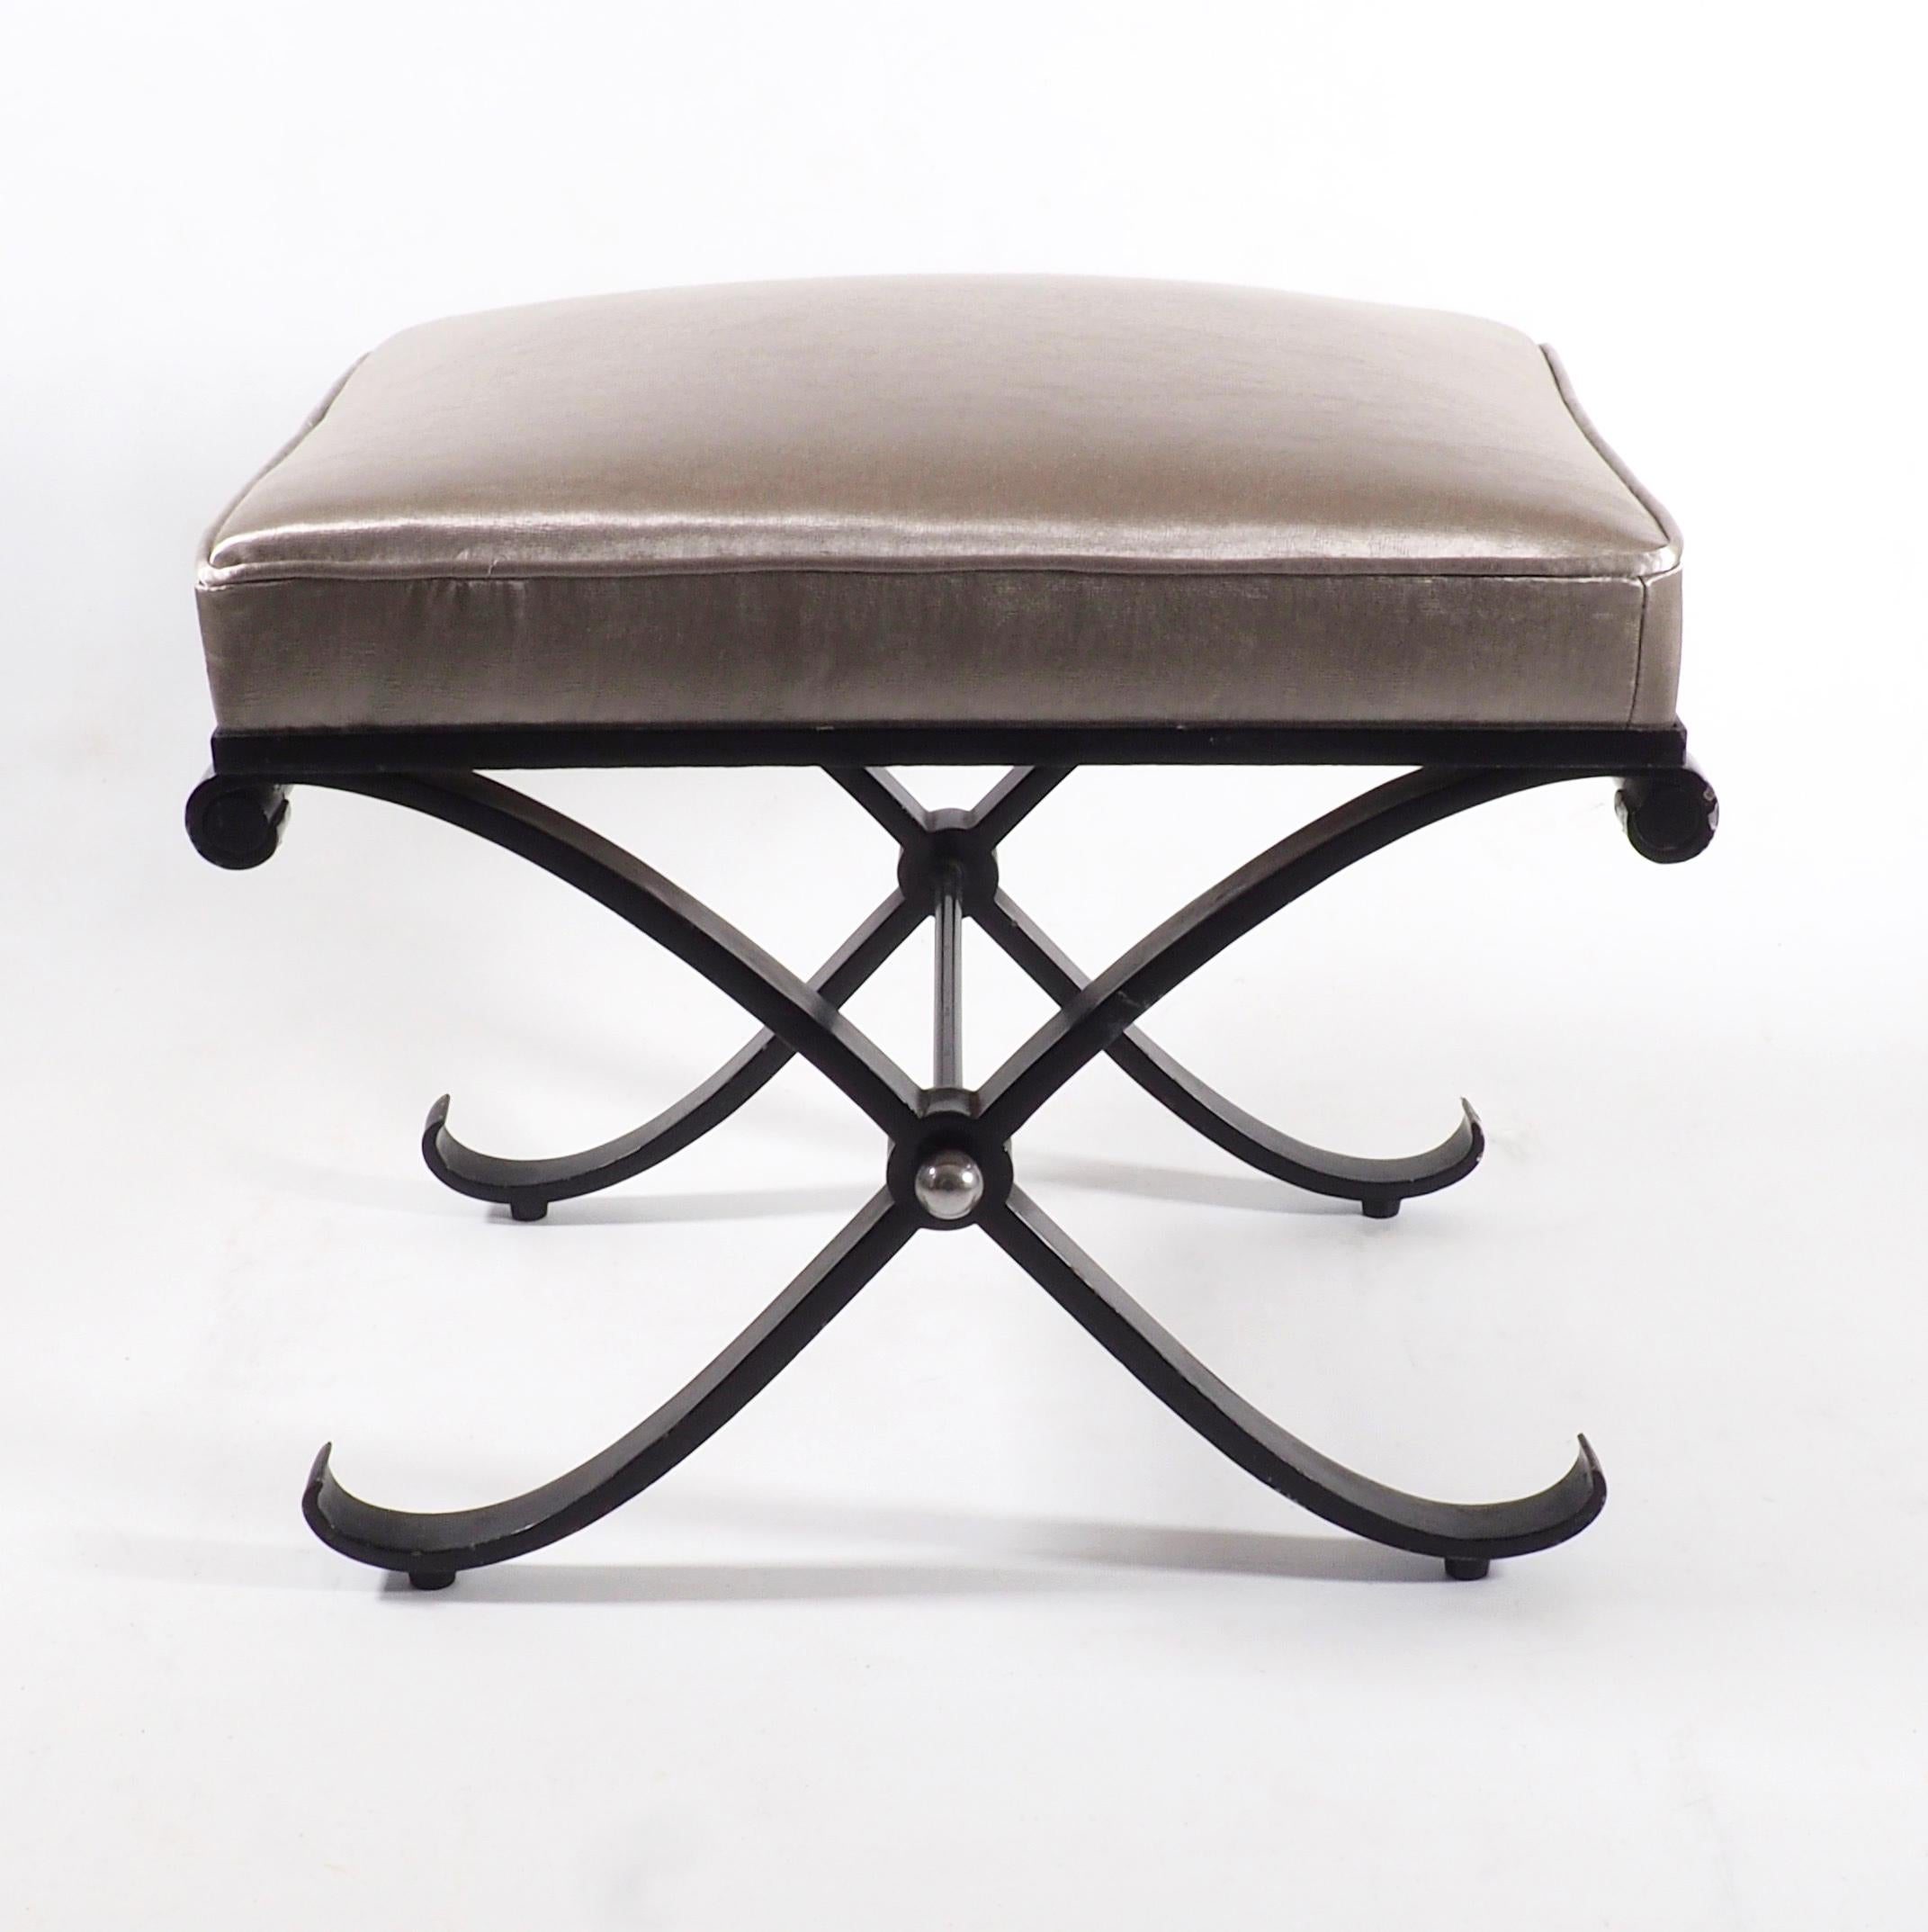 Elegant French 1950s Neo-Classical enameled iron x-stool with nickel accents.

